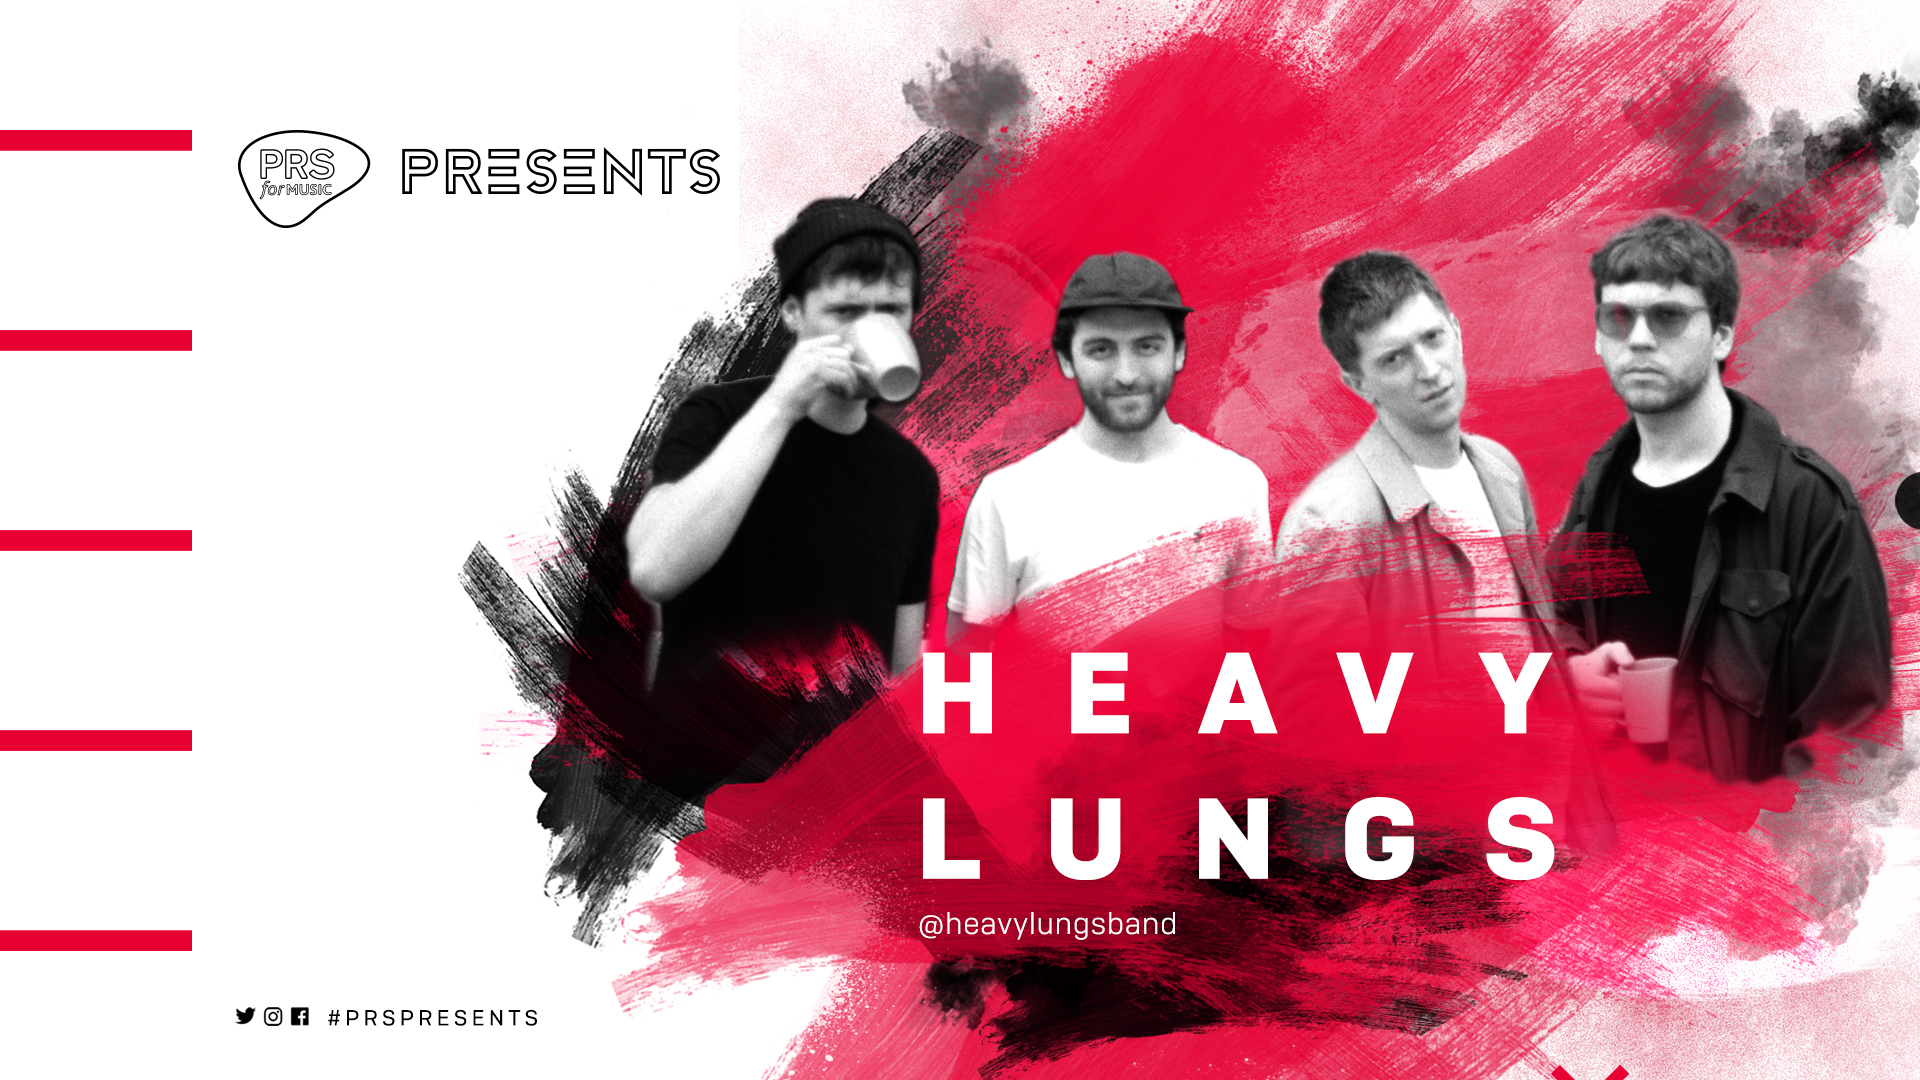 Heavy lungs image